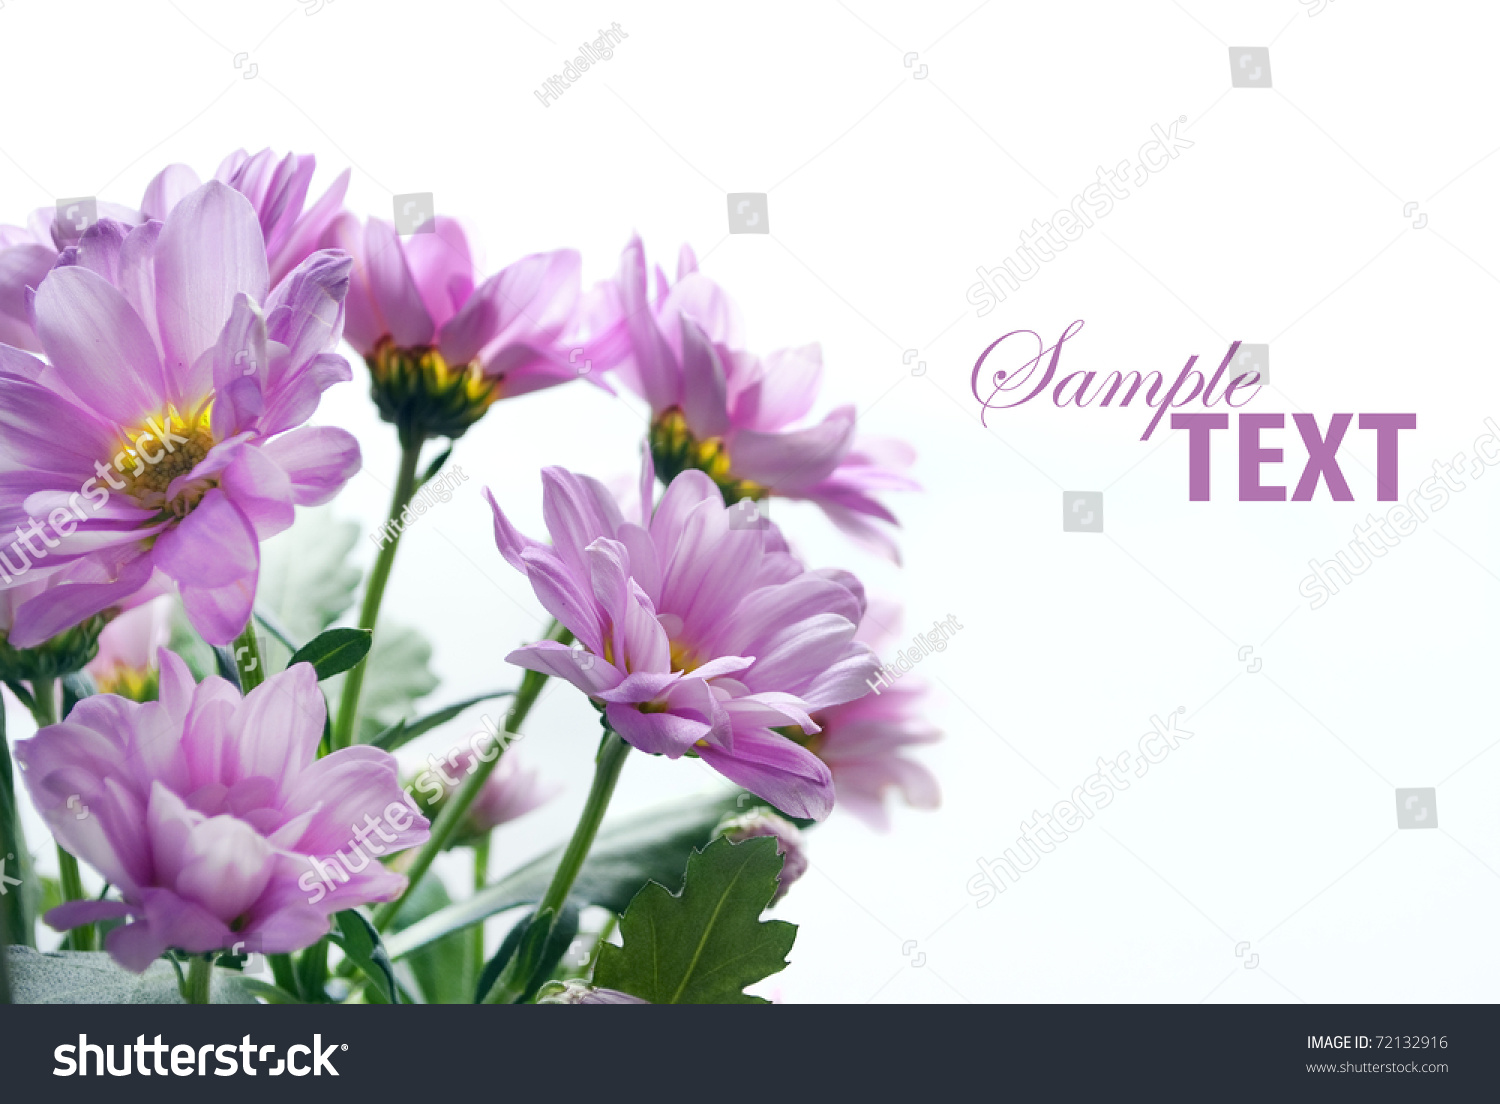 Flower Bouquet Isolated Over White Background Stock Photo 72132916 : Shutterstock